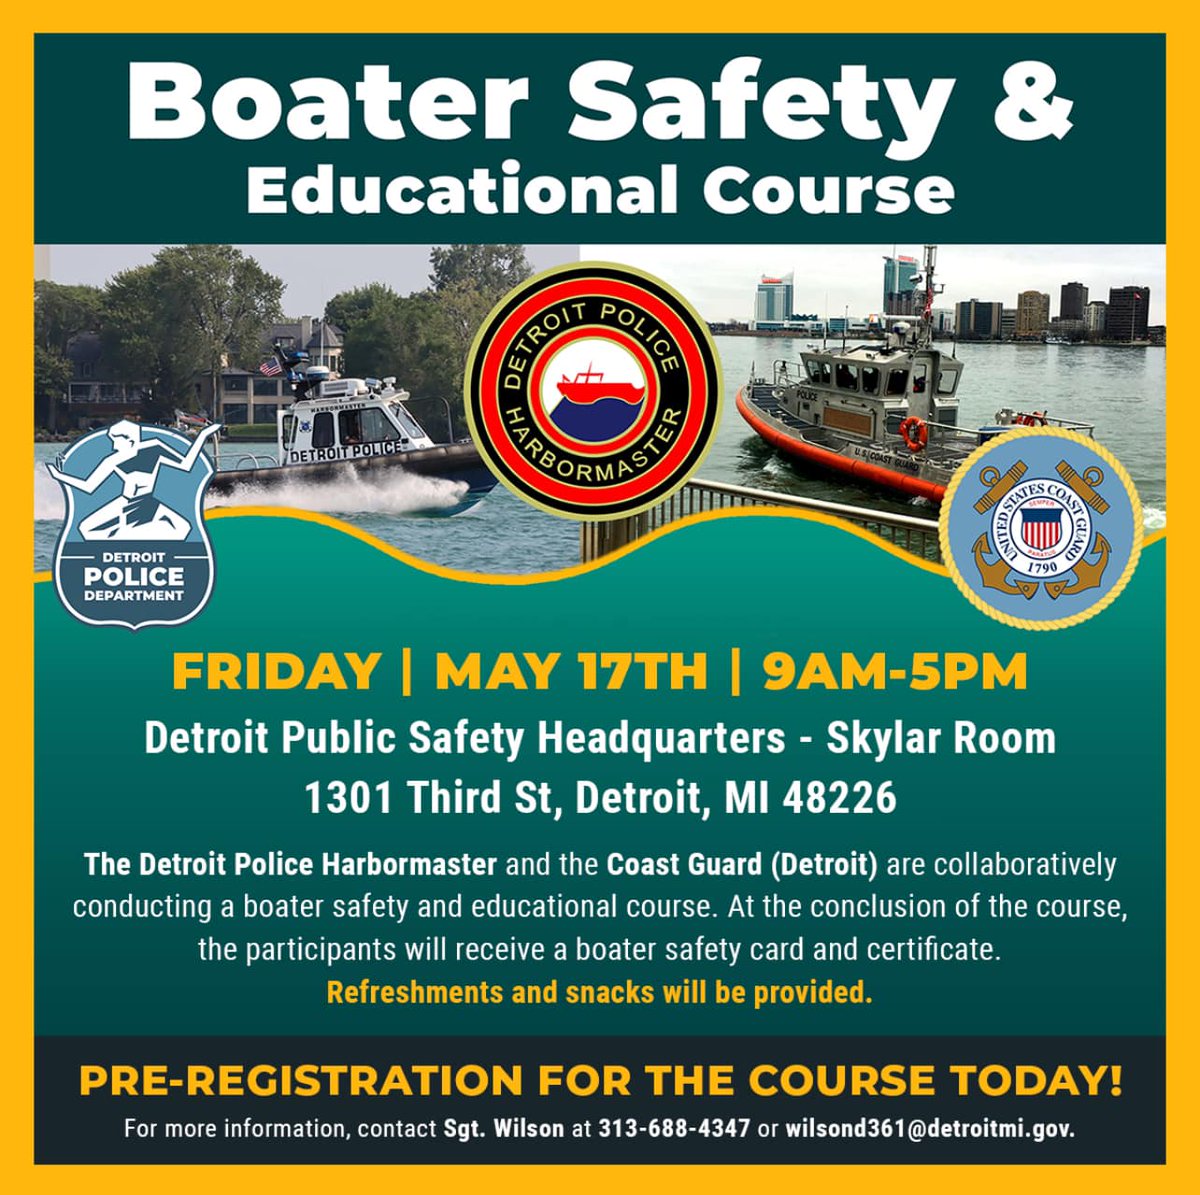 Warm weather is right around the corner!

Join the Detroit Police Harbormaster & U.S. Coast Guard for a boater safety & educational course Friday, May 17th at the DPSH from 9:00 AM- 5:00 PM. Participants will receive a boater safety card & certificate at the end of the course.